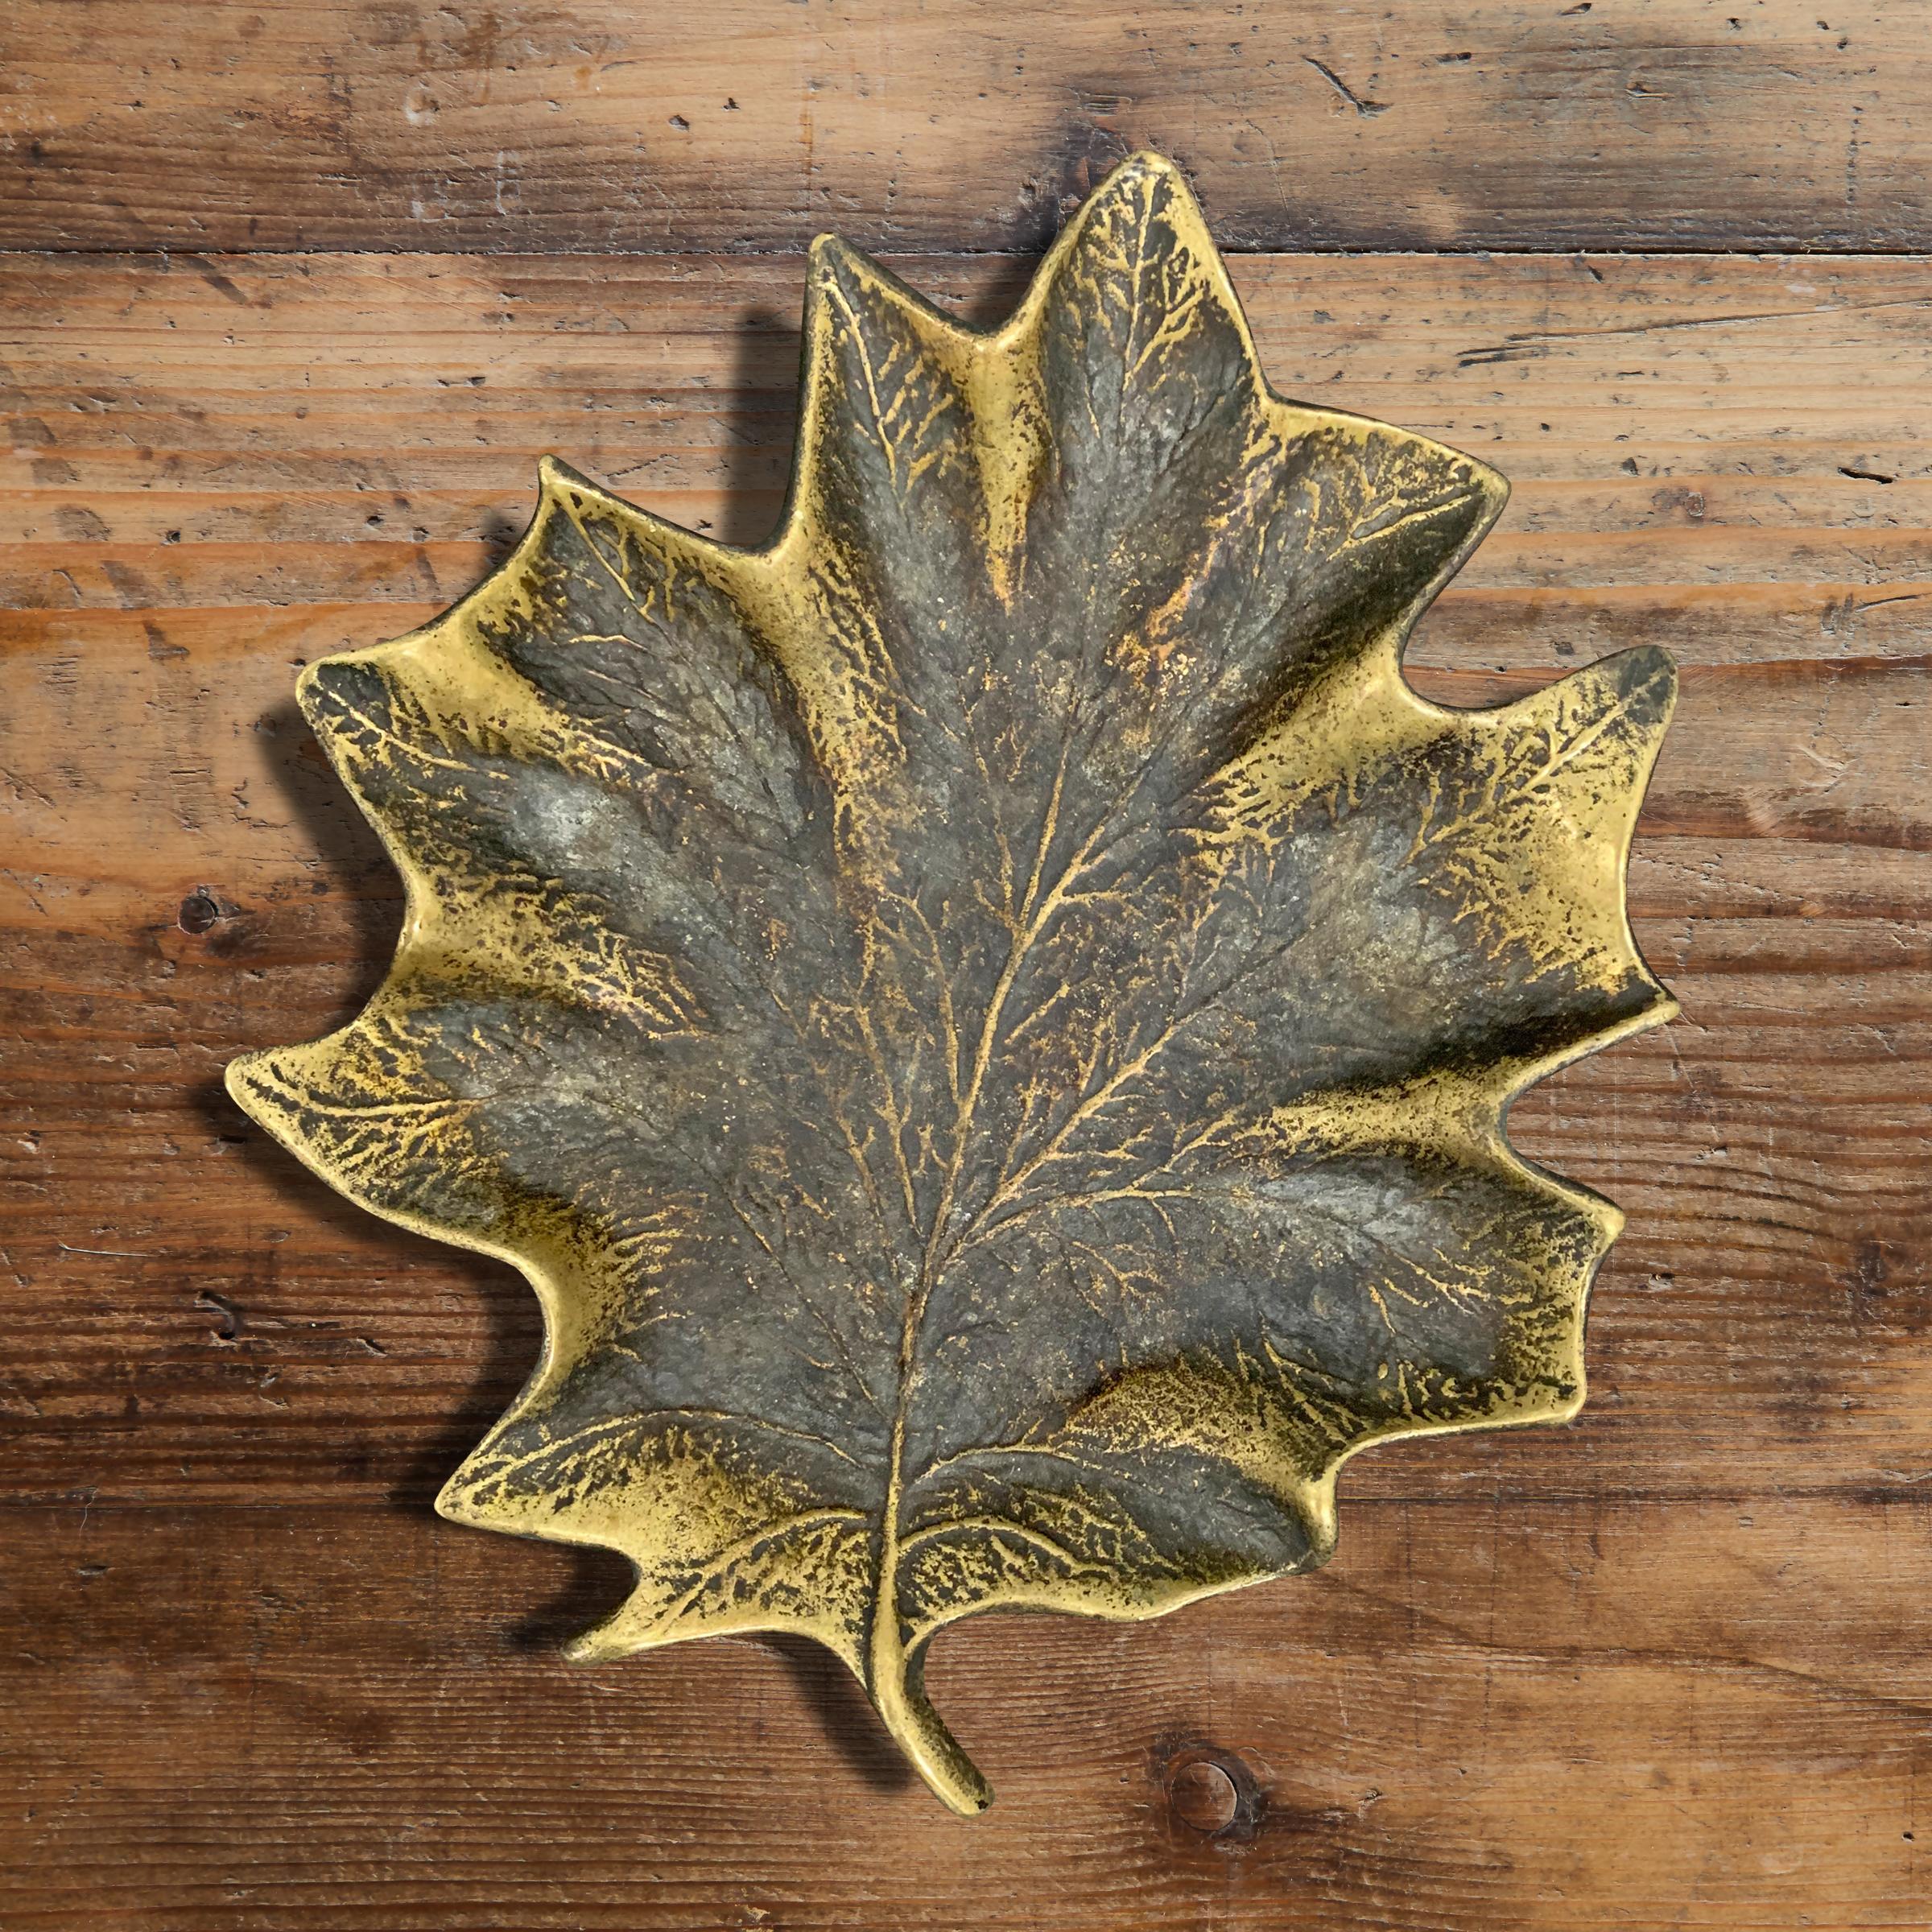 A wonderful vintage bronze life-size maple leaf dish with a fantastic patina. Perfect for catching your keys, pocket change, or any vices you may have.